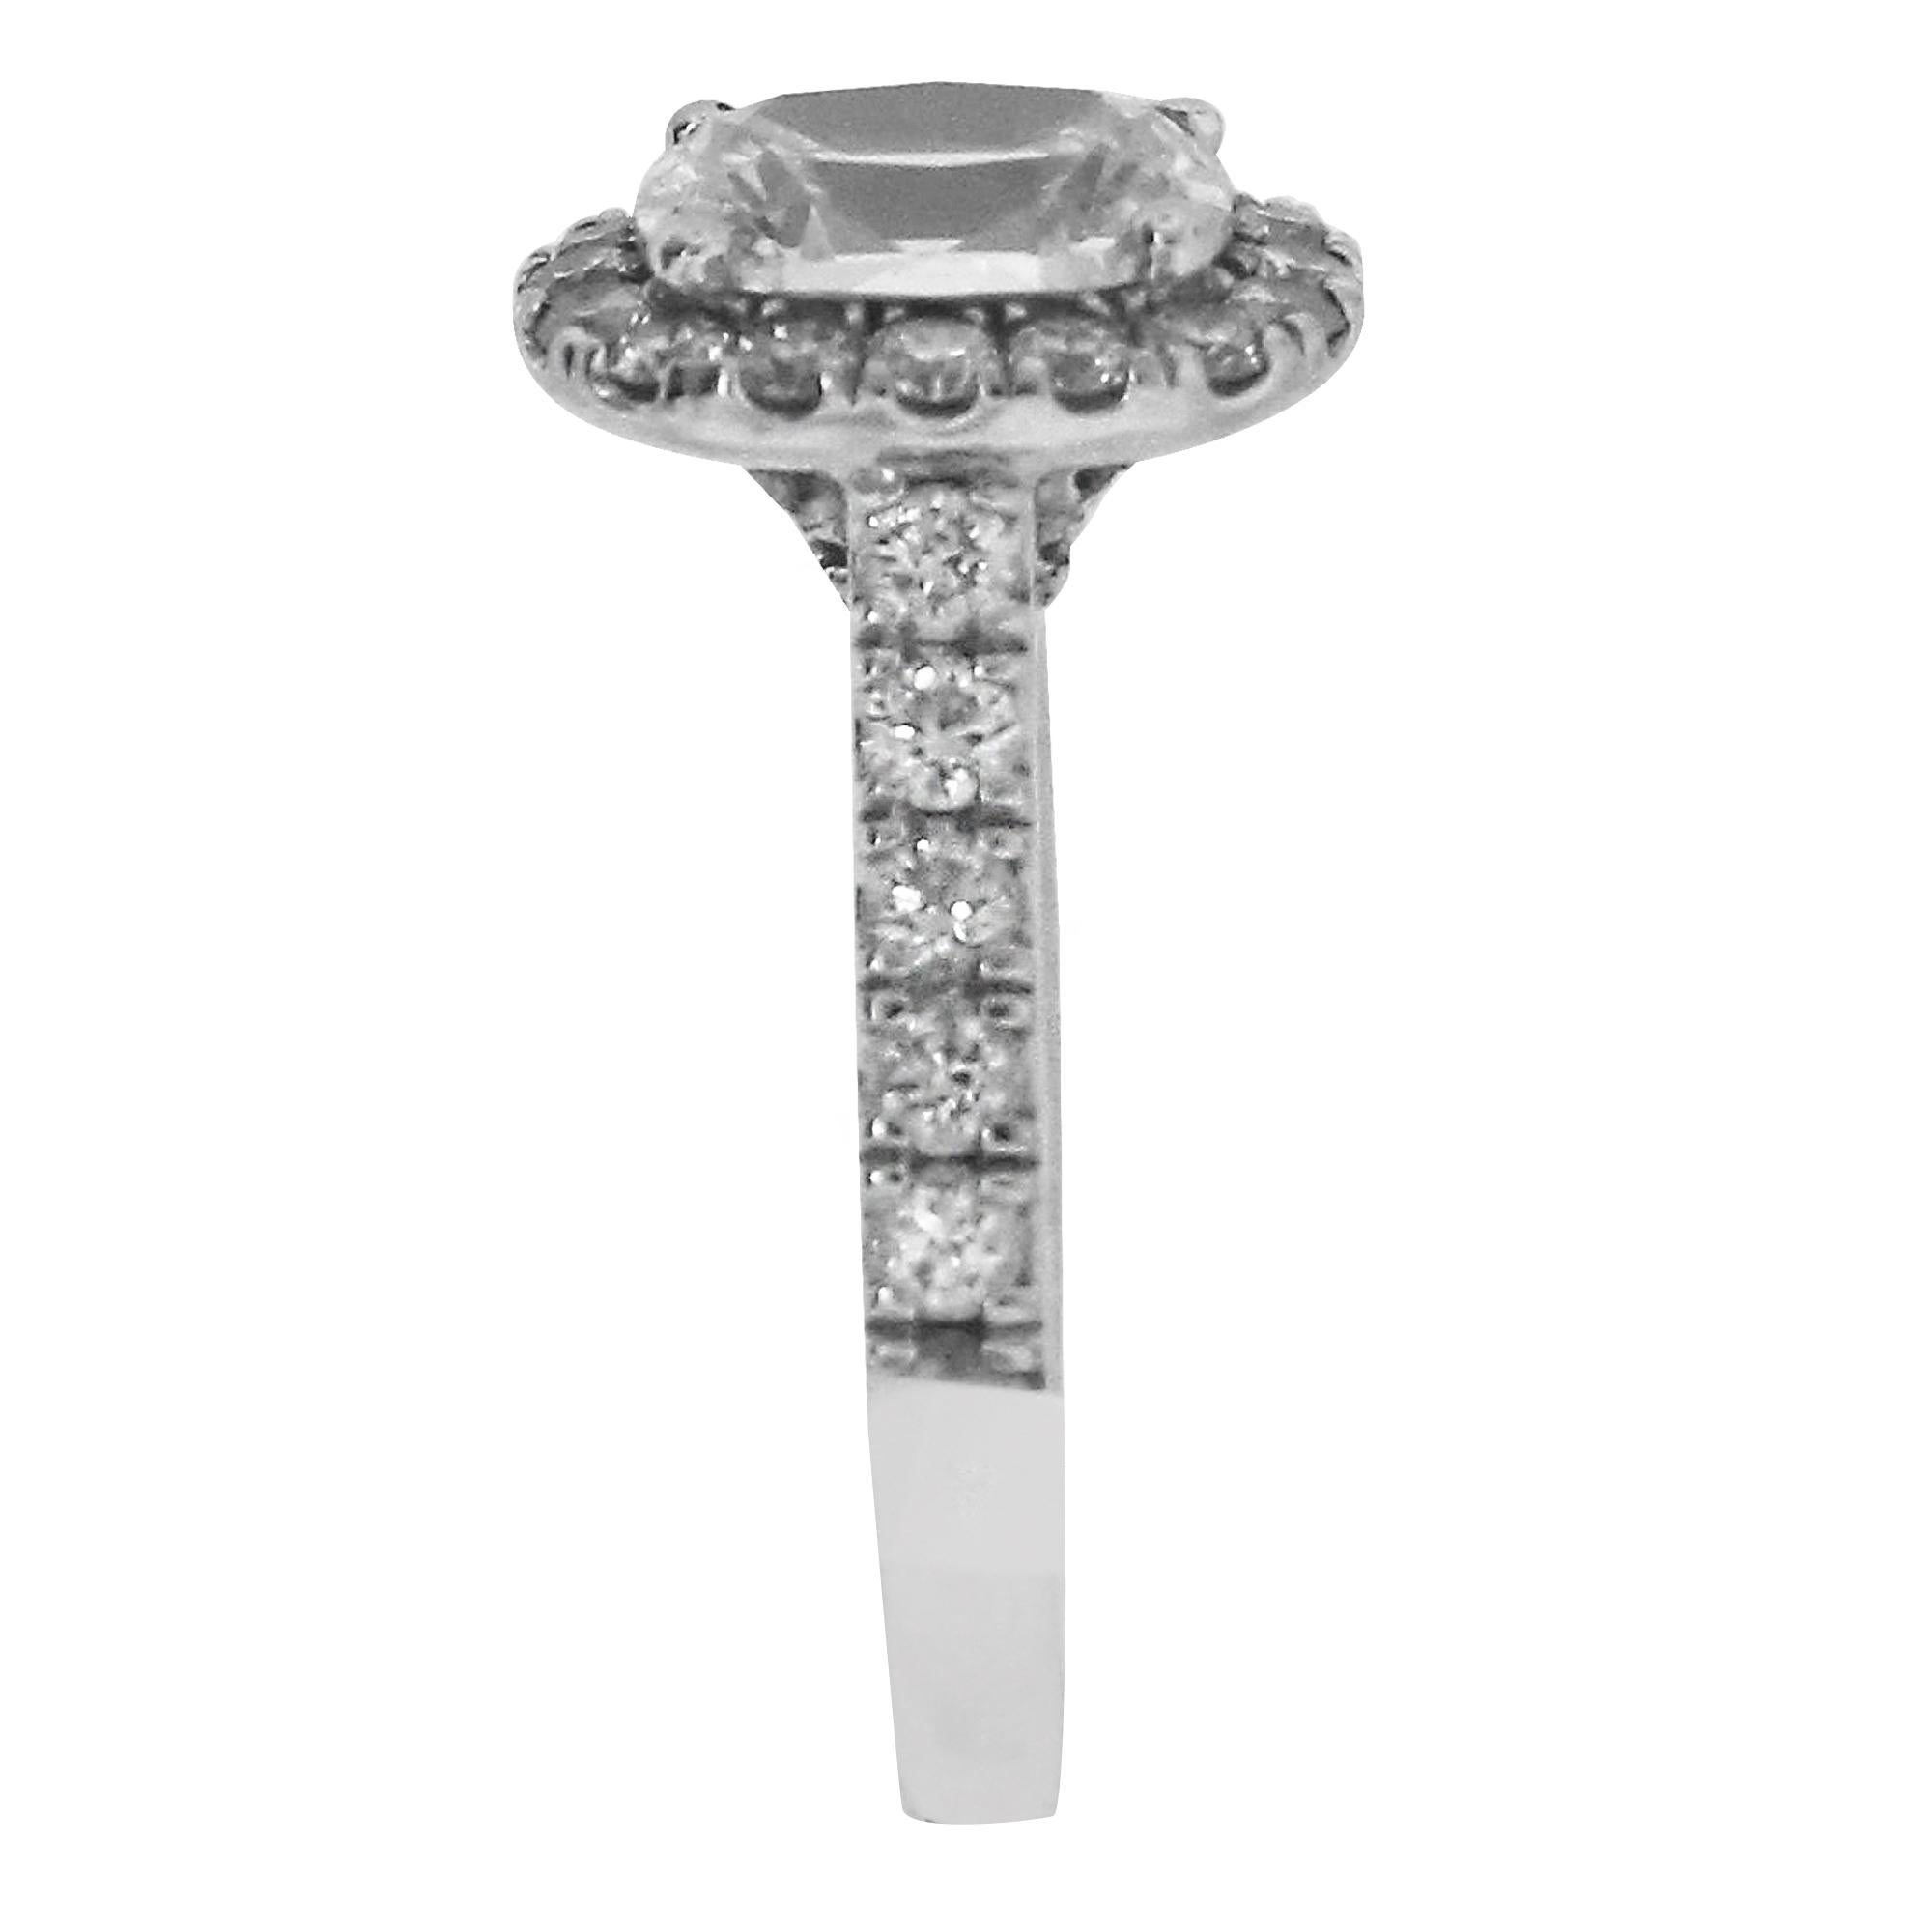 Material: 14k White Gold
Diamond Details: Approximately 1.37ctw cushion cut diamond. Center diamond is I in color and SI2 in clarity.
Accent Diamond Details: Approximately 0.91ctw round brilliant diamonds. Accent diamonds are G in color and SI1-SI2